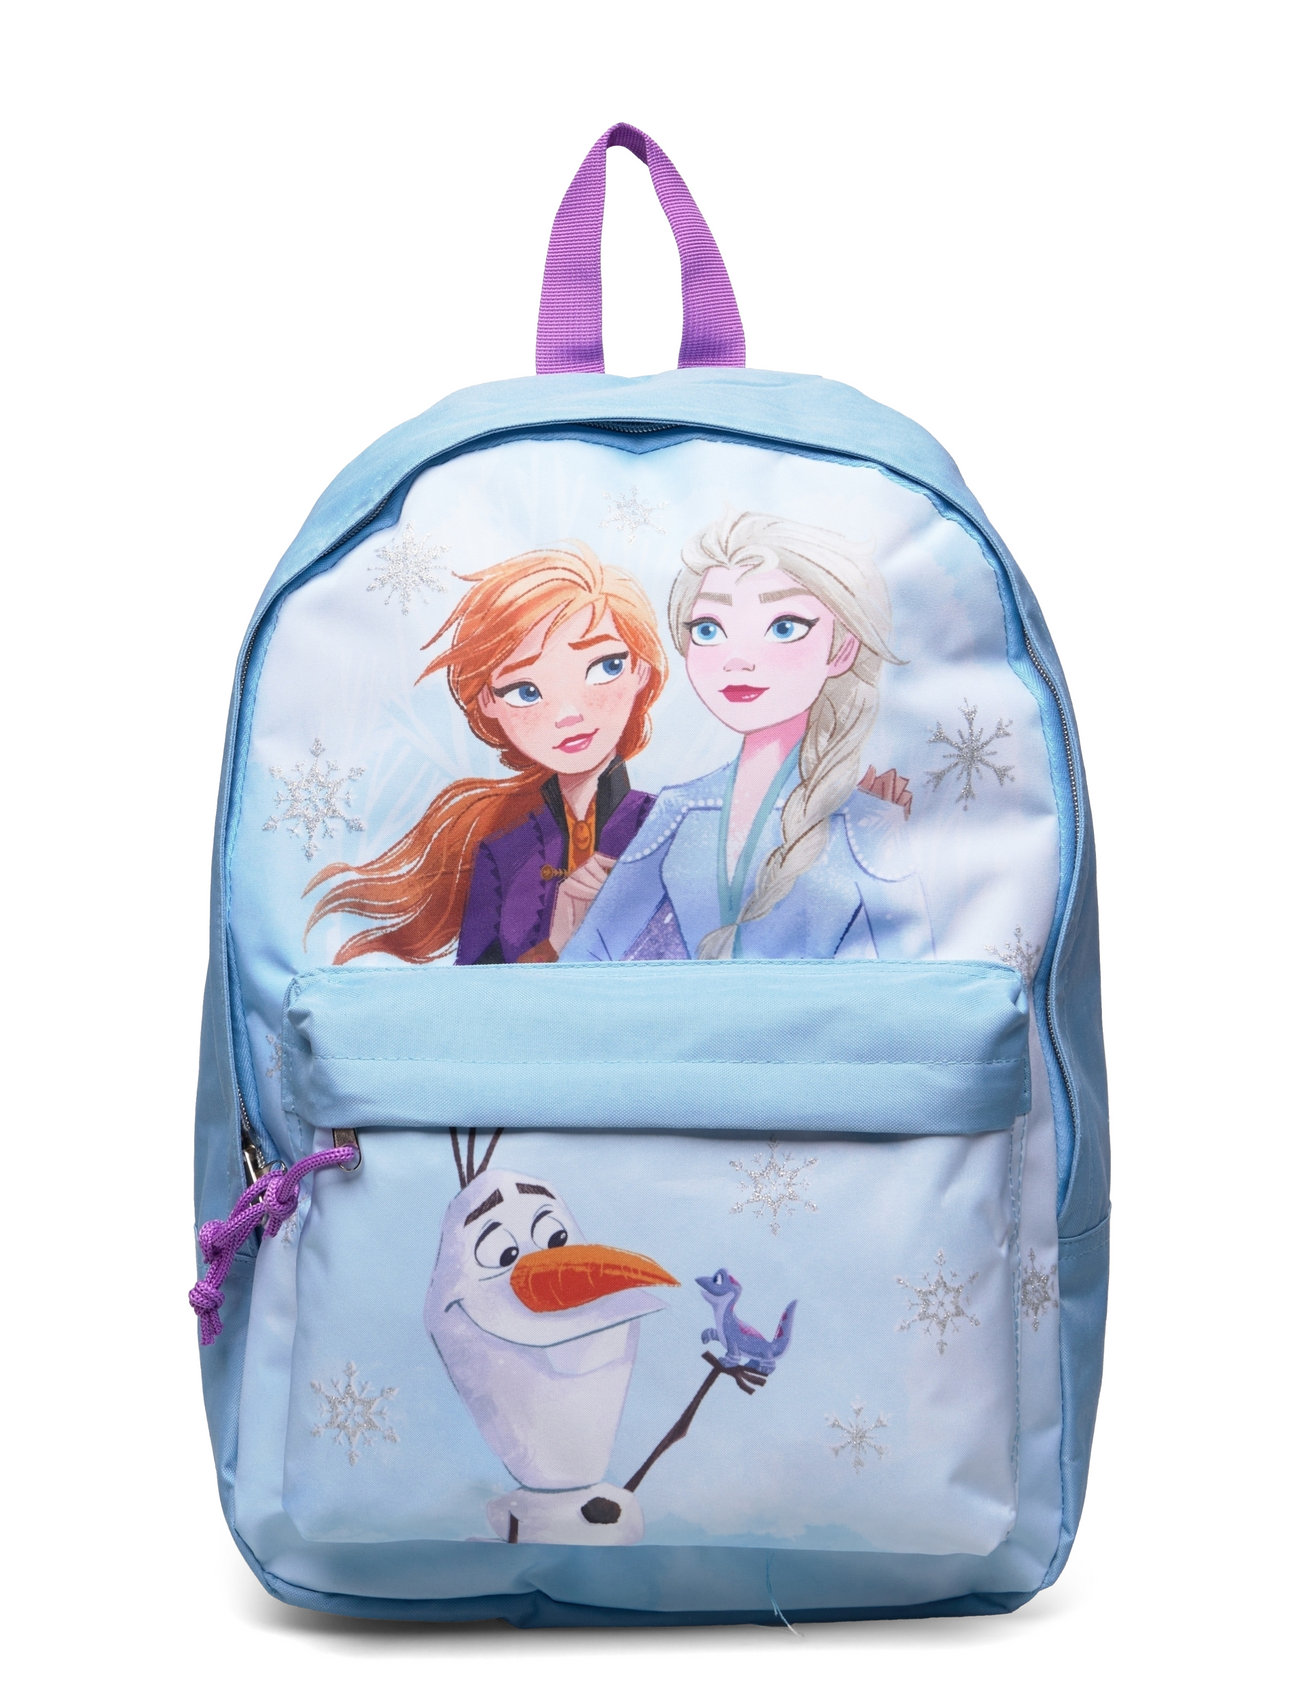 American Tourister Disney Frozen 18 Inch Hardside Lightweight Luggage,  Color: Frozen - JCPenney